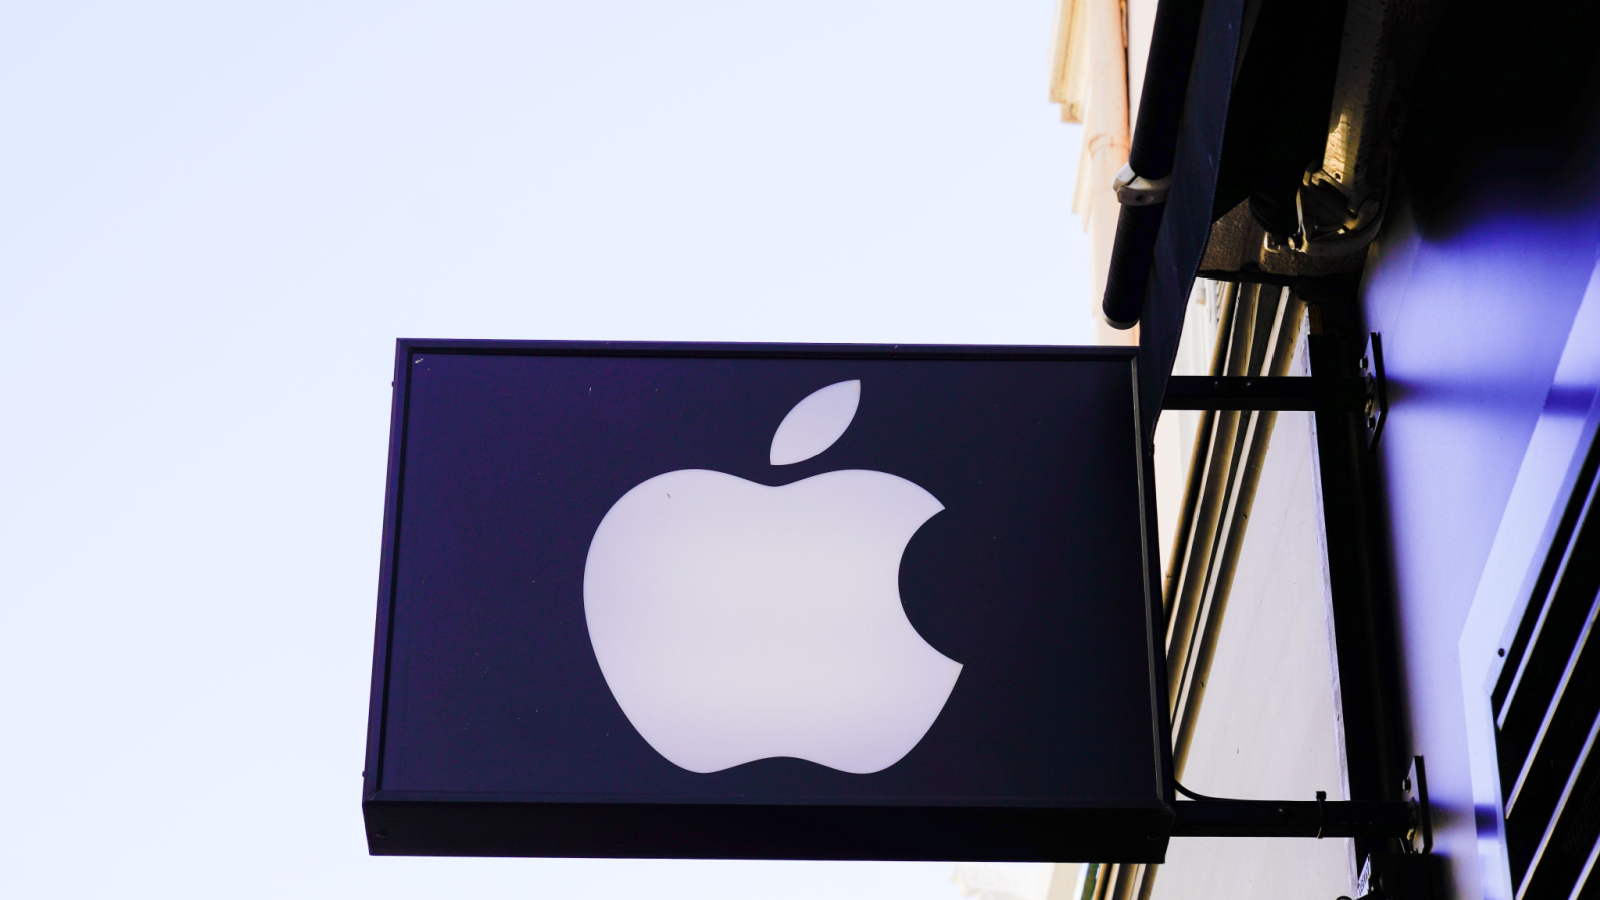 Apple Store Strike: Workers in Towson, Maryland Authorize First Strike